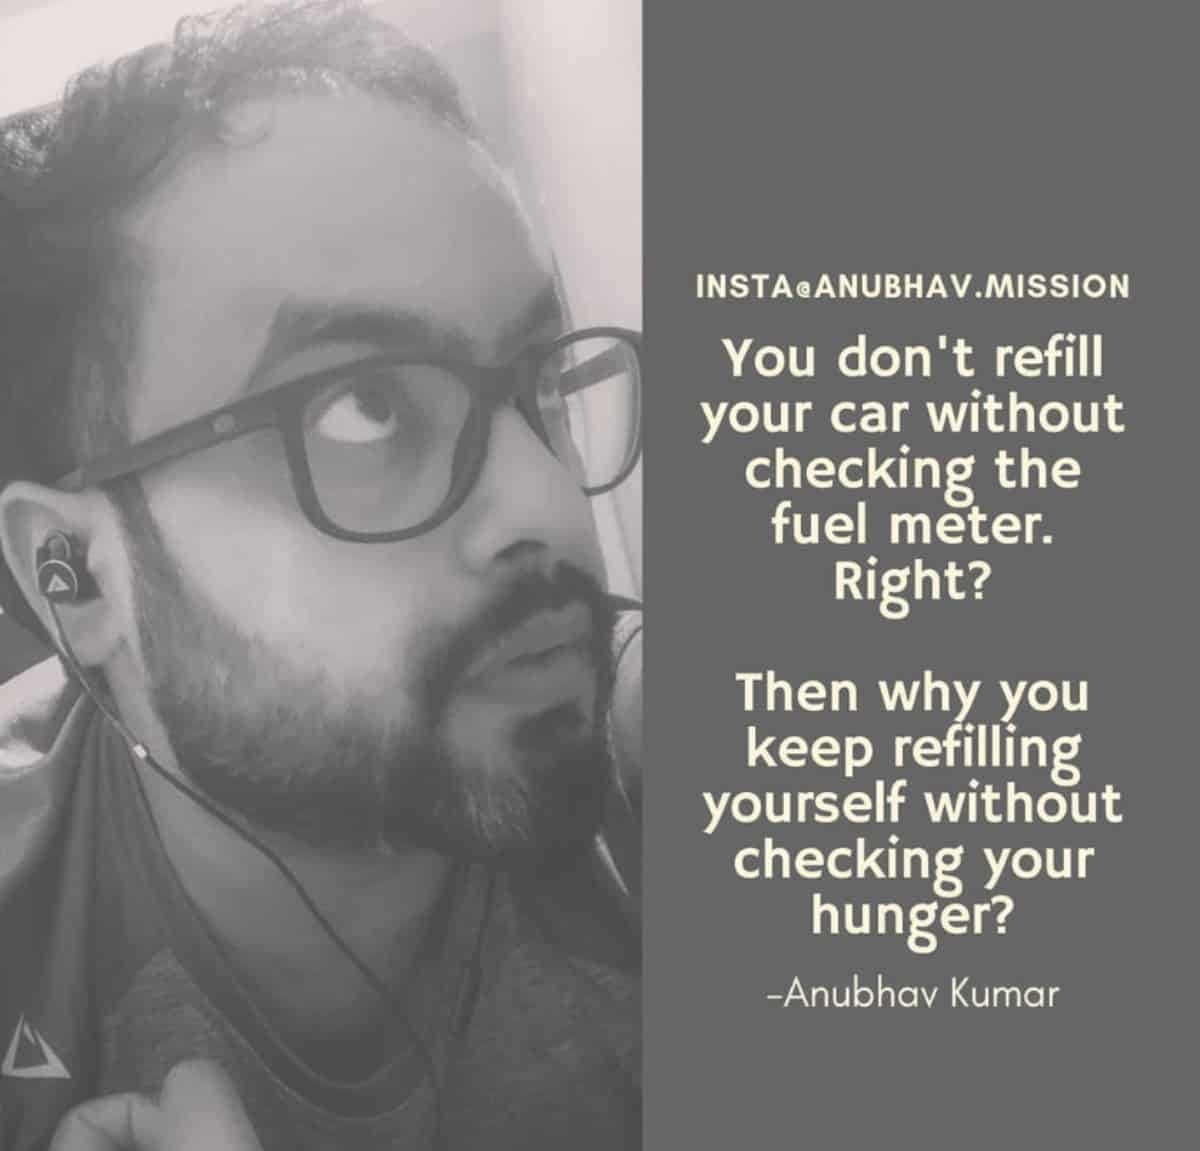 Anubhav weight loss mission statement with head shot.